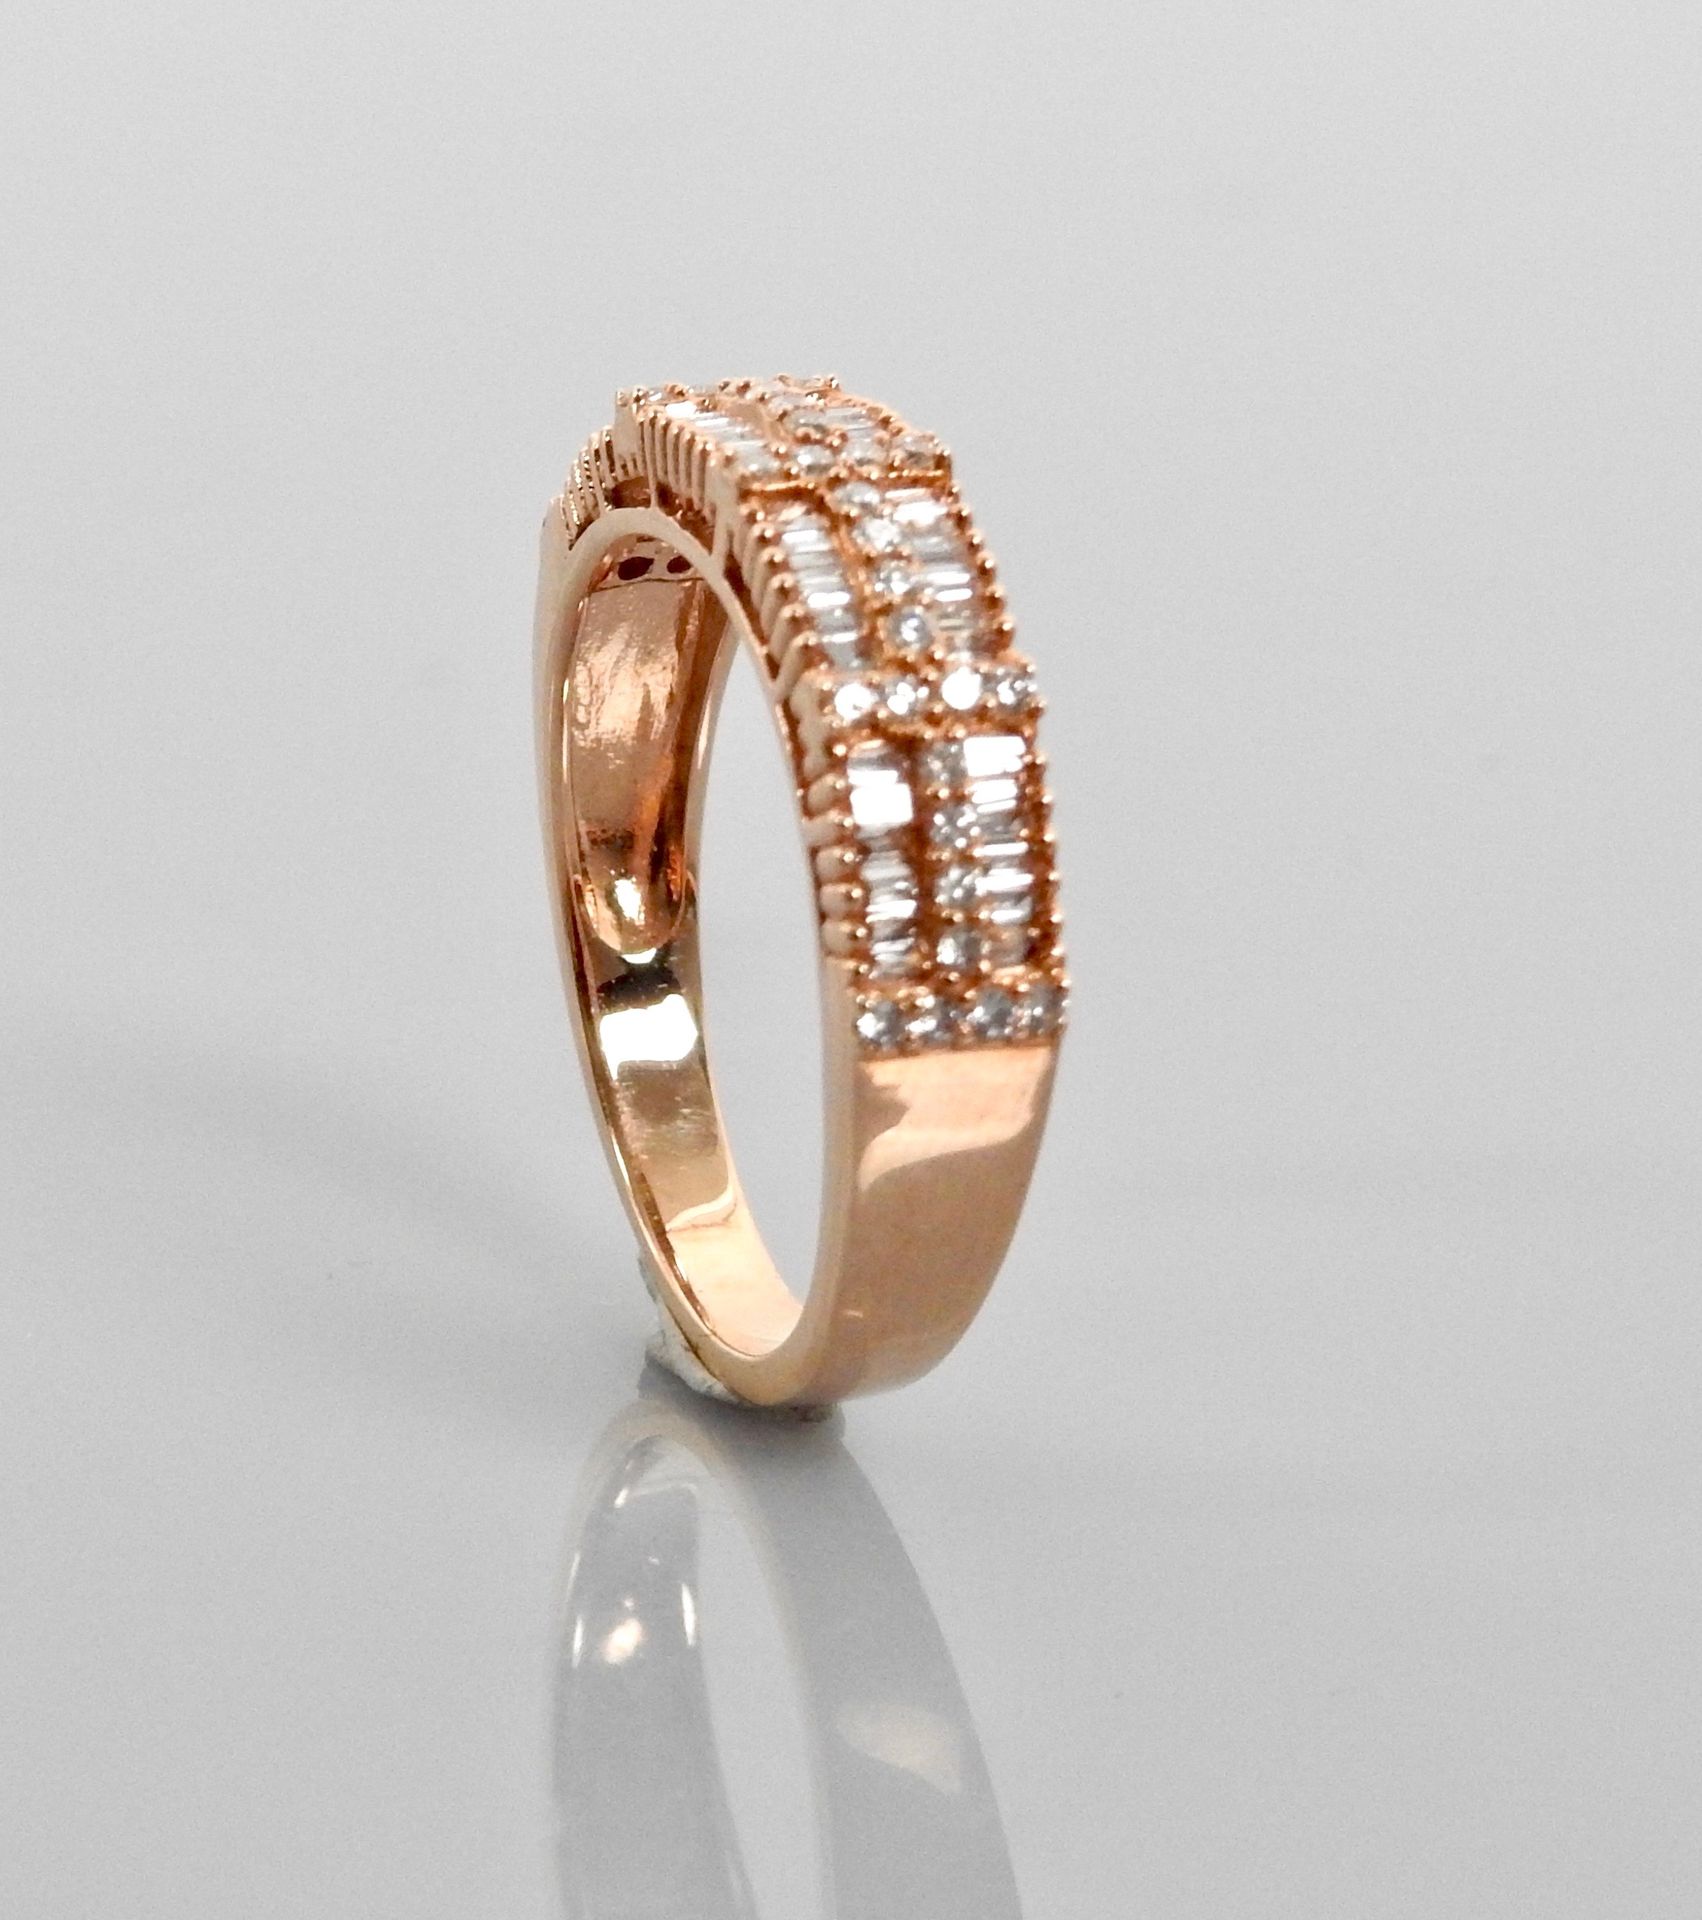 Null Wedding ring in pink gold, 750 MM, underlined by brilliant-cut and baguette&hellip;